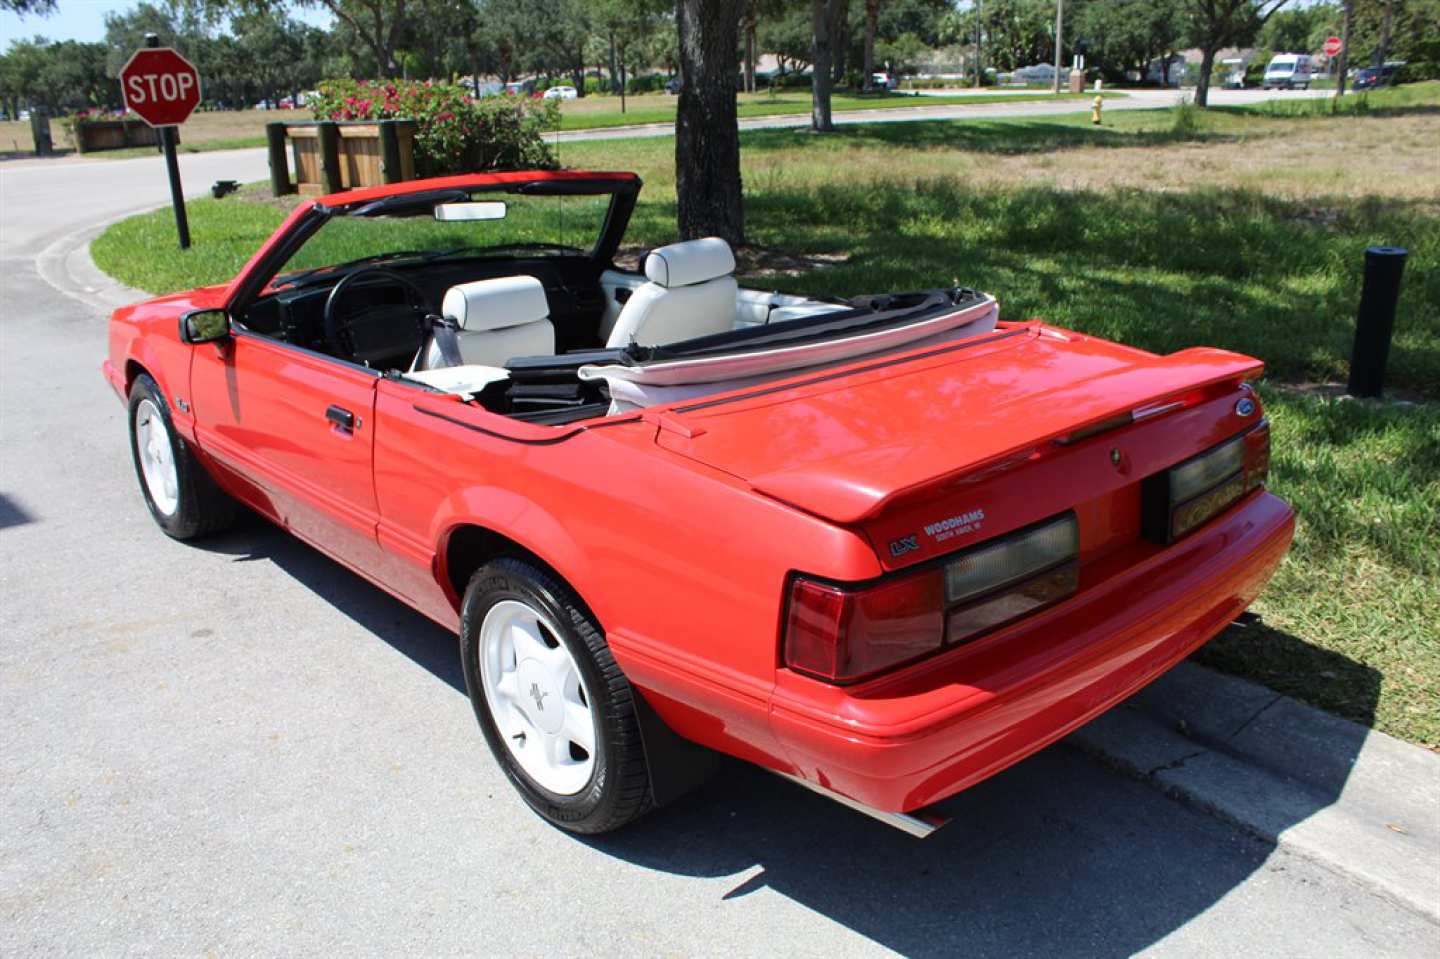 4th Image of a 1992 FORD MUSTANG LX